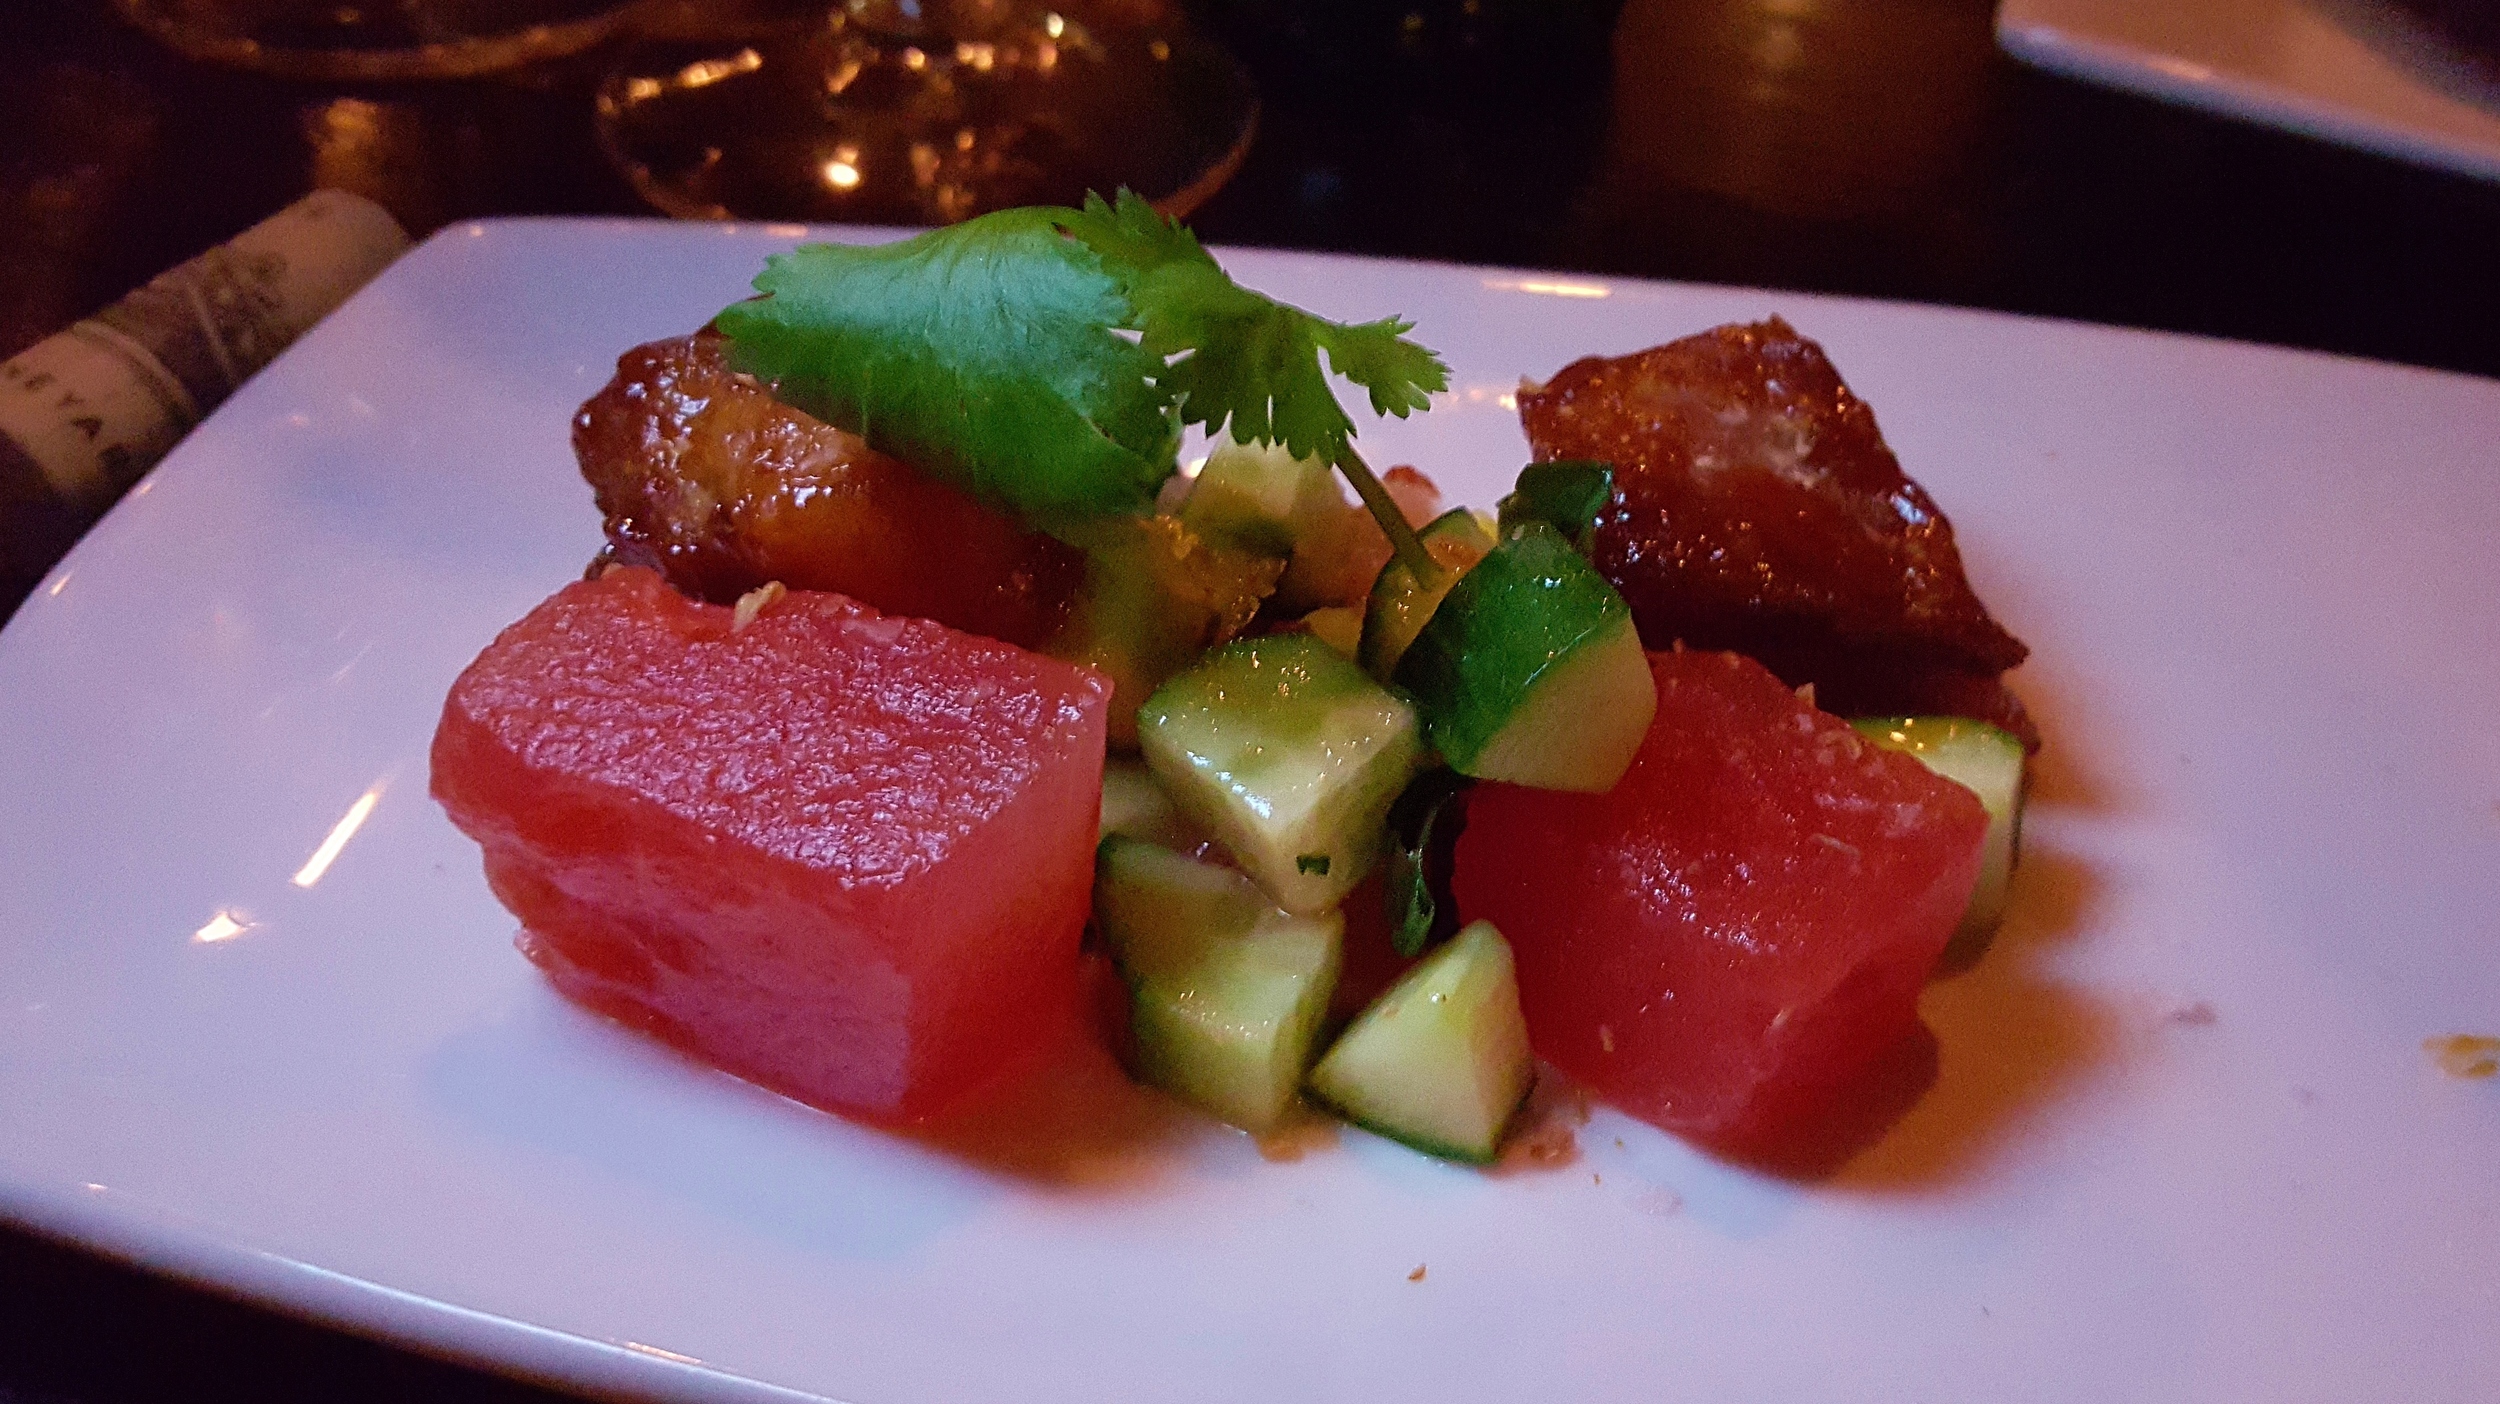 Pork belly with watermelon